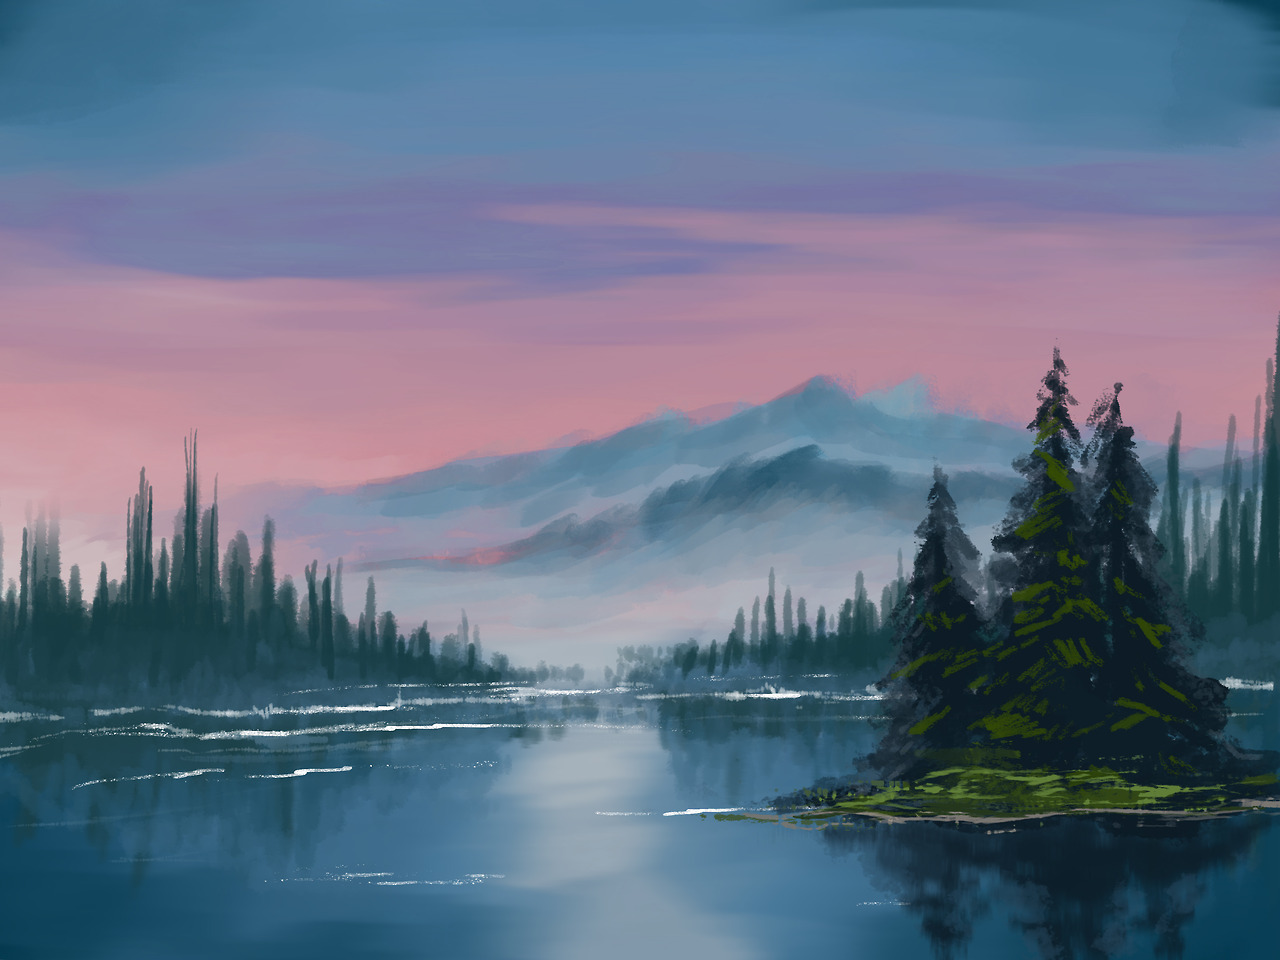 painted along with bob ross for a warmup